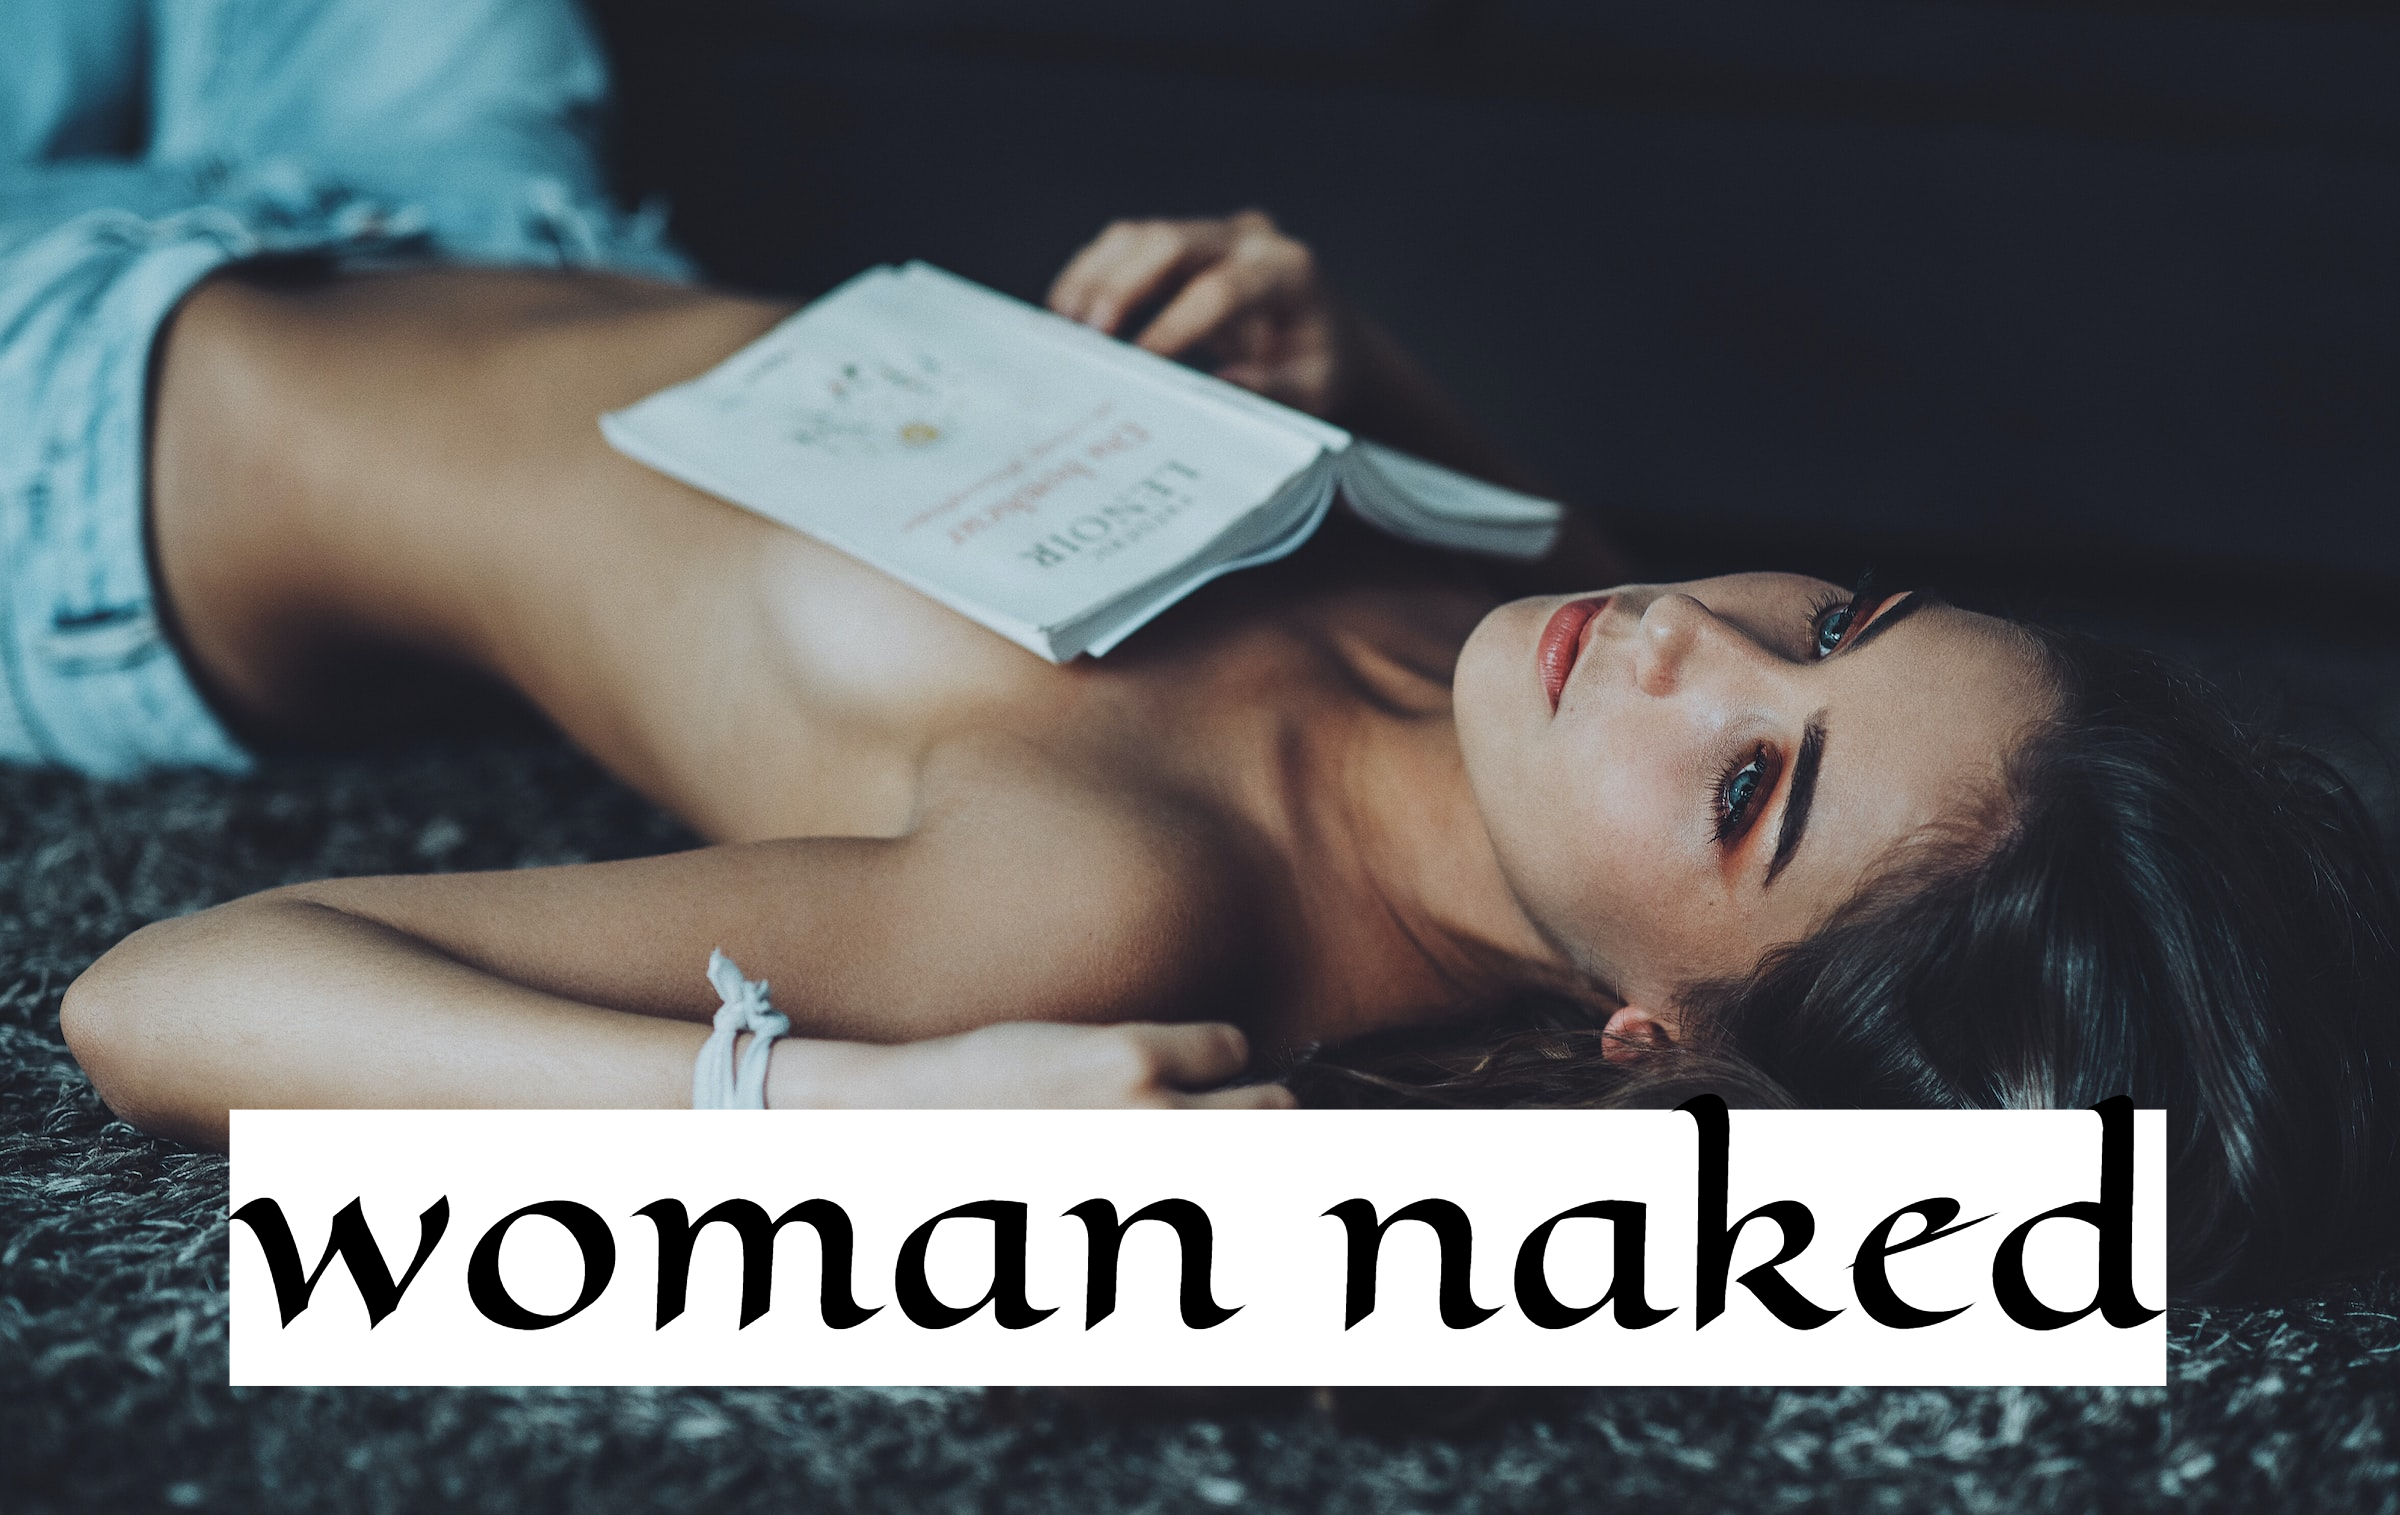 Woman Naked In A Dream - Makes You Feel Represents Your Personality